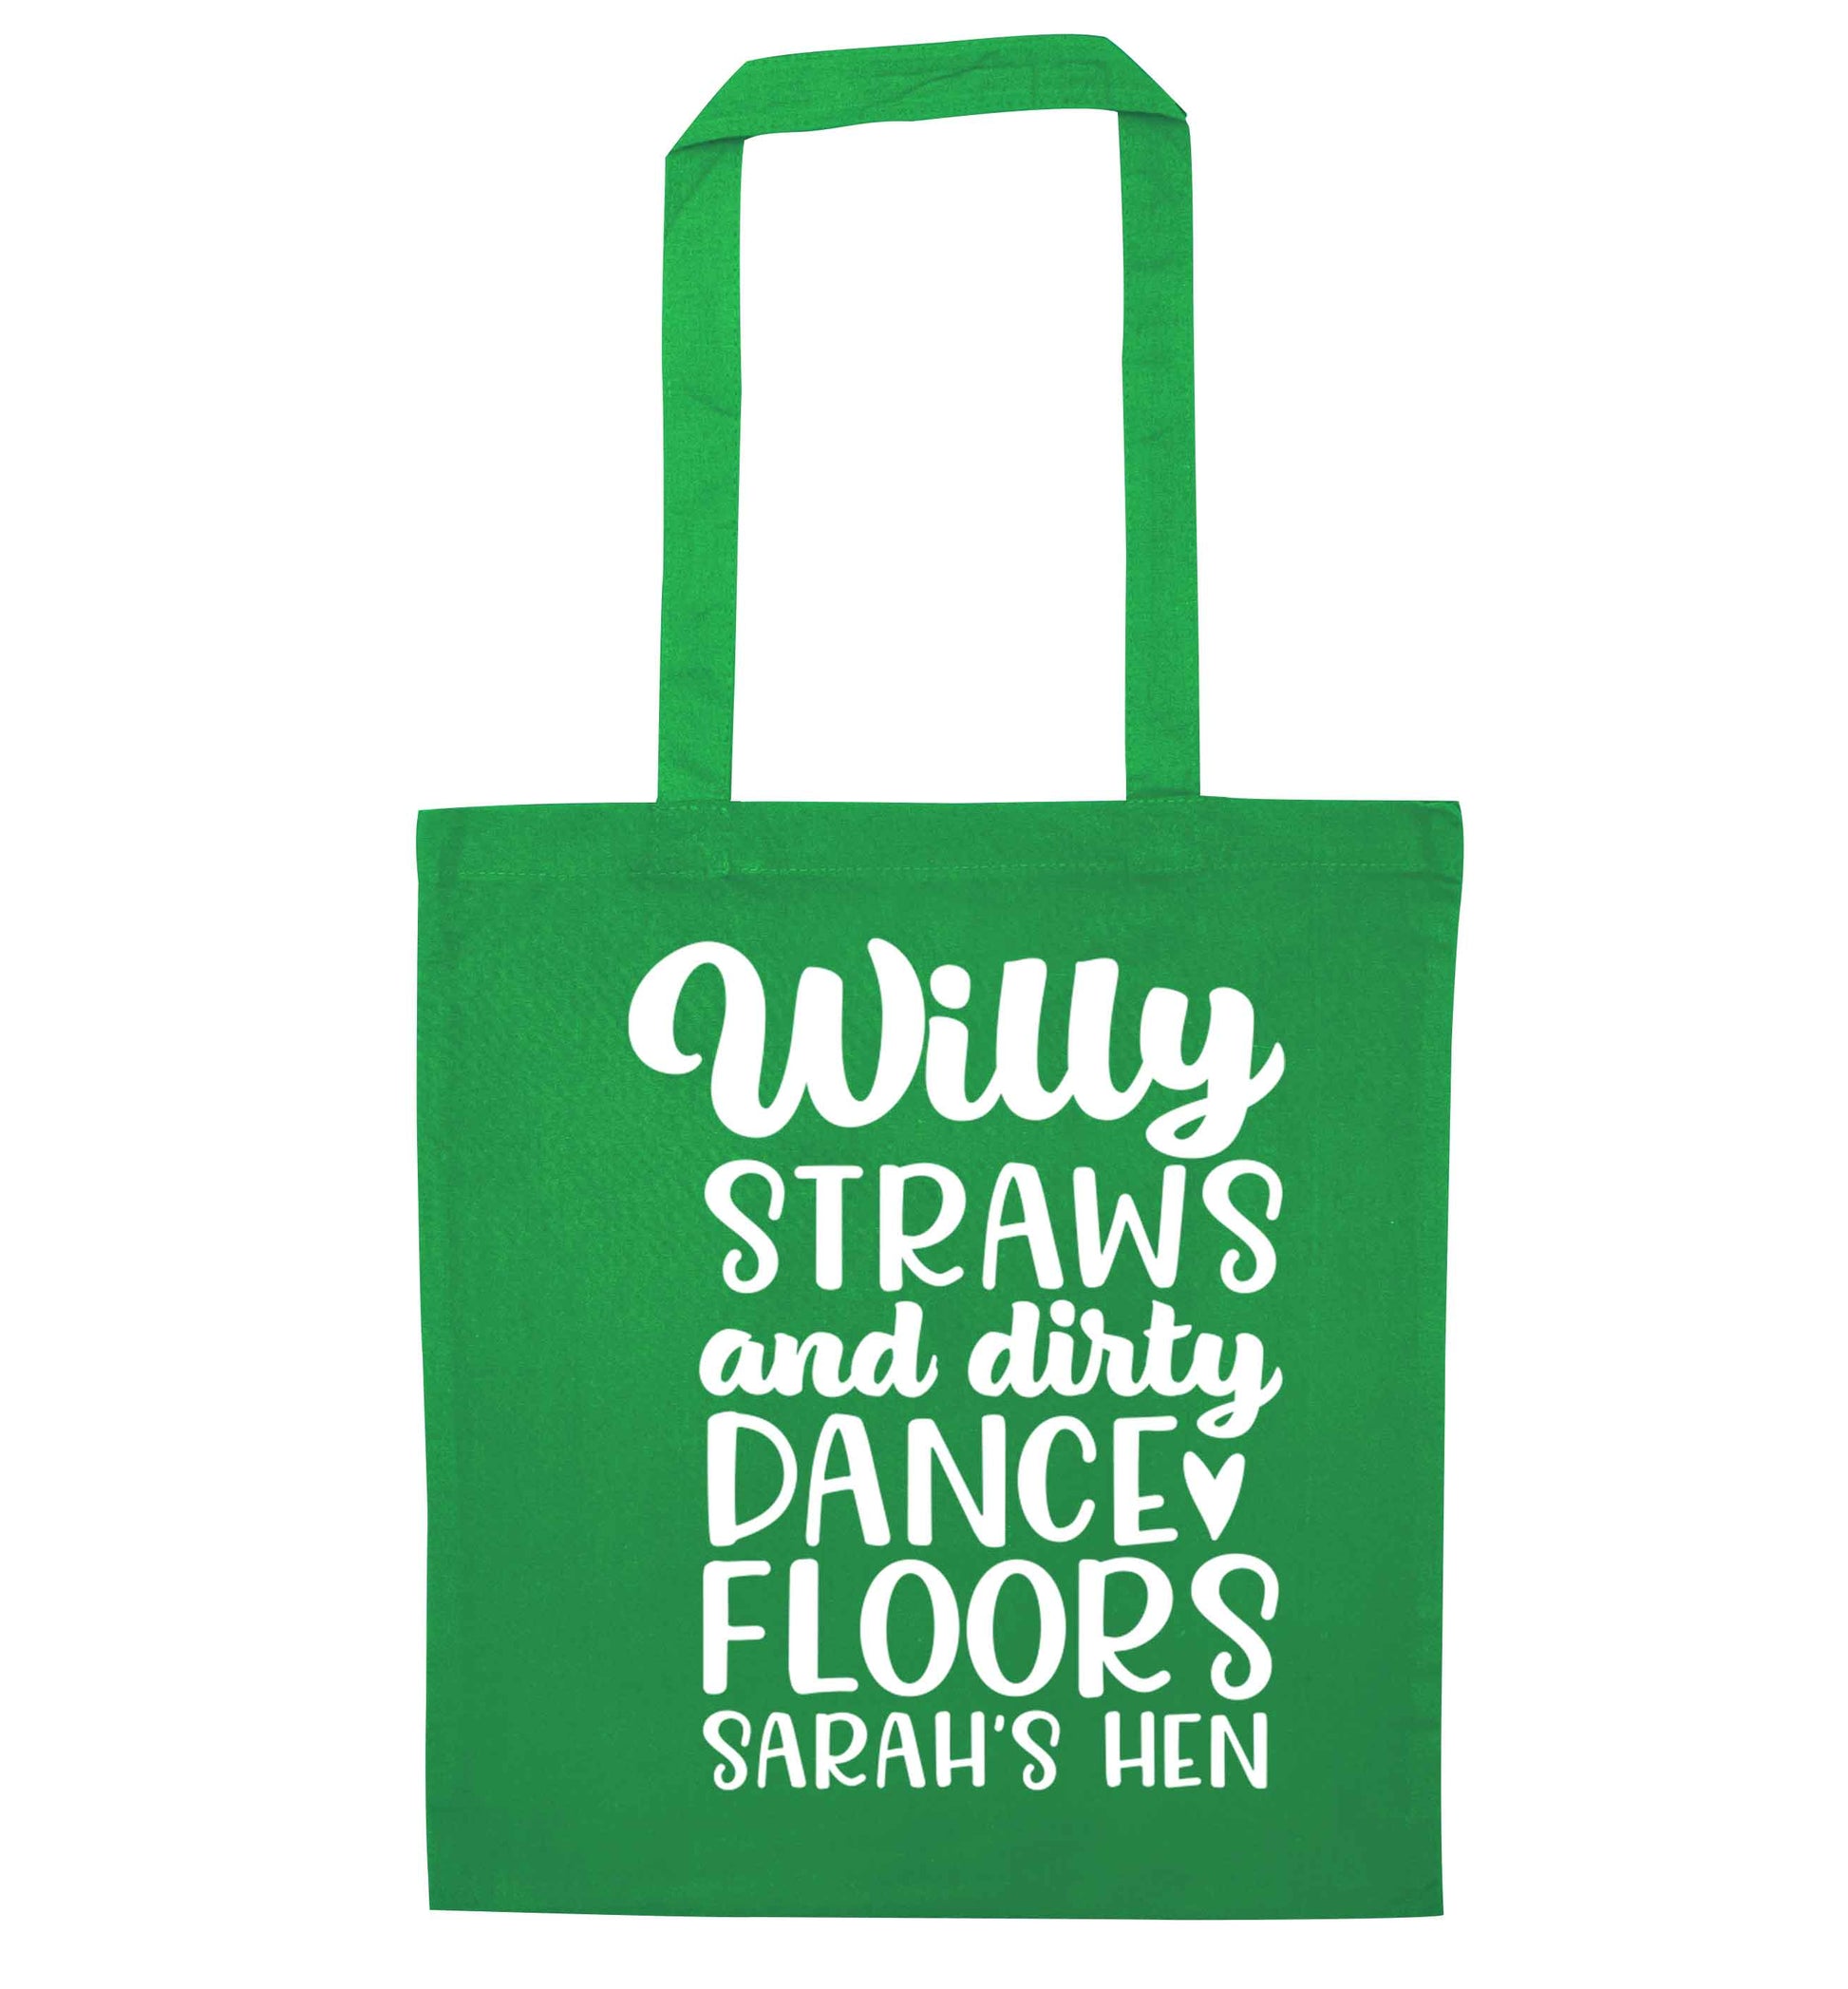 Willy straws and dirty dance floors green tote bag